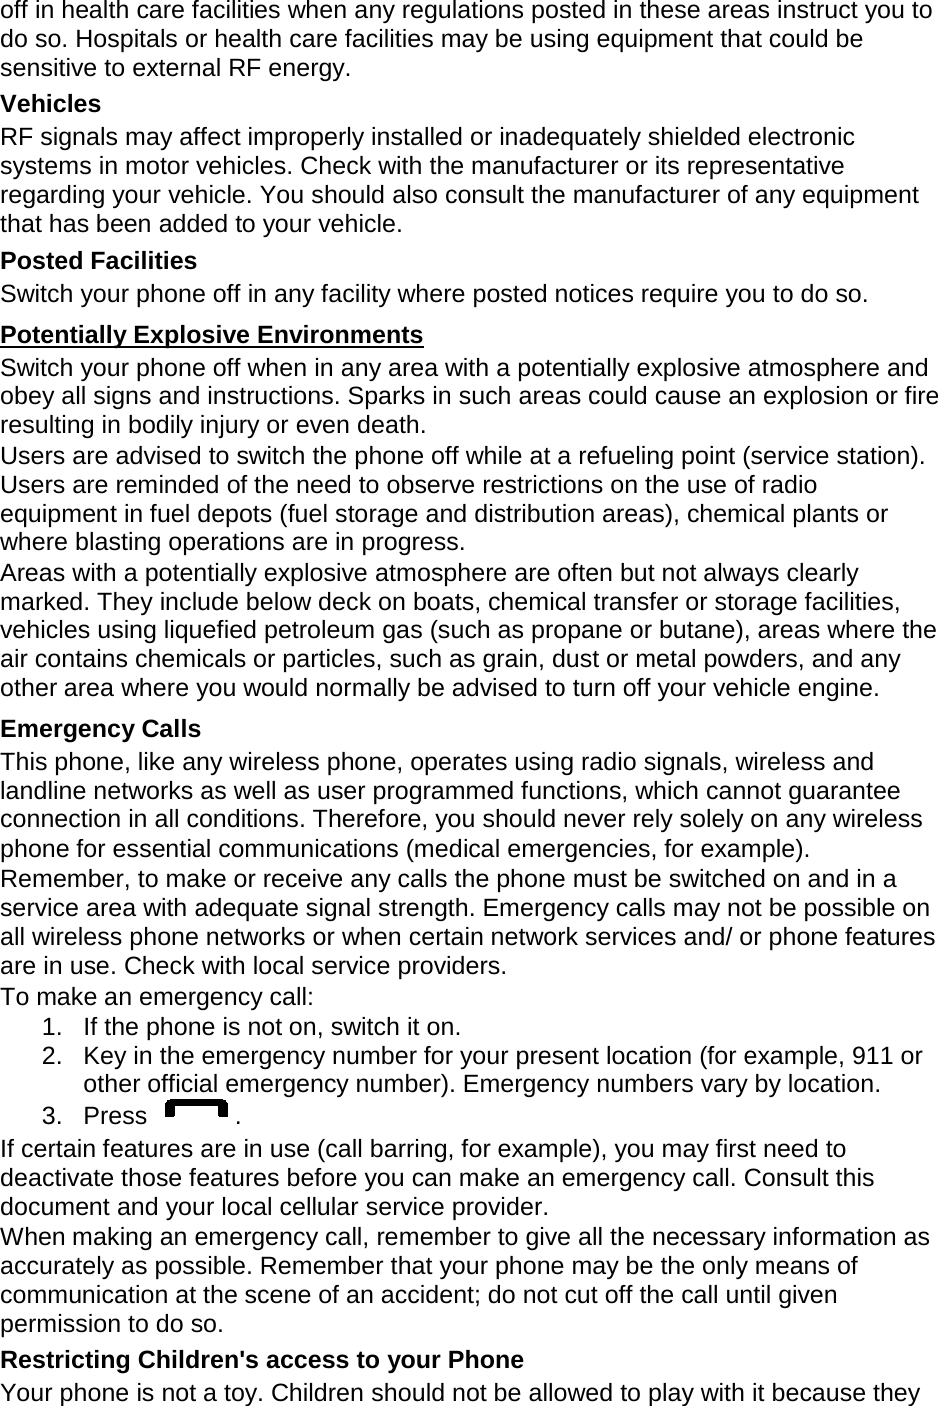 off in health care facilities when any regulations posted in these areas instruct you to do so. Hospitals or health care facilities may be using equipment that could be sensitive to external RF energy. Vehicles RF signals may affect improperly installed or inadequately shielded electronic systems in motor vehicles. Check with the manufacturer or its representative regarding your vehicle. You should also consult the manufacturer of any equipment that has been added to your vehicle. Posted Facilities Switch your phone off in any facility where posted notices require you to do so. Switch your phone off when in any area with a potentially explosive atmosphere and obey all signs and instructions. Sparks in such areas could cause an explosion or fire resulting in bodily injury or even death. Potentially Explosive Environments Users are advised to switch the phone off while at a refueling point (service station). Users are reminded of the need to observe restrictions on the use of radio equipment in fuel depots (fuel storage and distribution areas), chemical plants or where blasting operations are in progress. Areas with a potentially explosive atmosphere are often but not always clearly marked. They include below deck on boats, chemical transfer or storage facilities, vehicles using liquefied petroleum gas (such as propane or butane), areas where the air contains chemicals or particles, such as grain, dust or metal powders, and any other area where you would normally be advised to turn off your vehicle engine. Emergency Calls This phone, like any wireless phone, operates using radio signals, wireless and landline networks as well as user programmed functions, which cannot guarantee connection in all conditions. Therefore, you should never rely solely on any wireless phone for essential communications (medical emergencies, for example). Remember, to make or receive any calls the phone must be switched on and in a service area with adequate signal strength. Emergency calls may not be possible on all wireless phone networks or when certain network services and/ or phone features are in use. Check with local service providers. To make an emergency call: 1. If the phone is not on, switch it on. 2. Key in the emergency number for your present location (for example, 911 or other official emergency number). Emergency numbers vary by location. 3.  Press  . If certain features are in use (call barring, for example), you may first need to deactivate those features before you can make an emergency call. Consult this document and your local cellular service provider. When making an emergency call, remember to give all the necessary information as accurately as possible. Remember that your phone may be the only means of communication at the scene of an accident; do not cut off the call until given permission to do so. Restricting Children&apos;s access to your Phone Your phone is not a toy. Children should not be allowed to play with it because they 